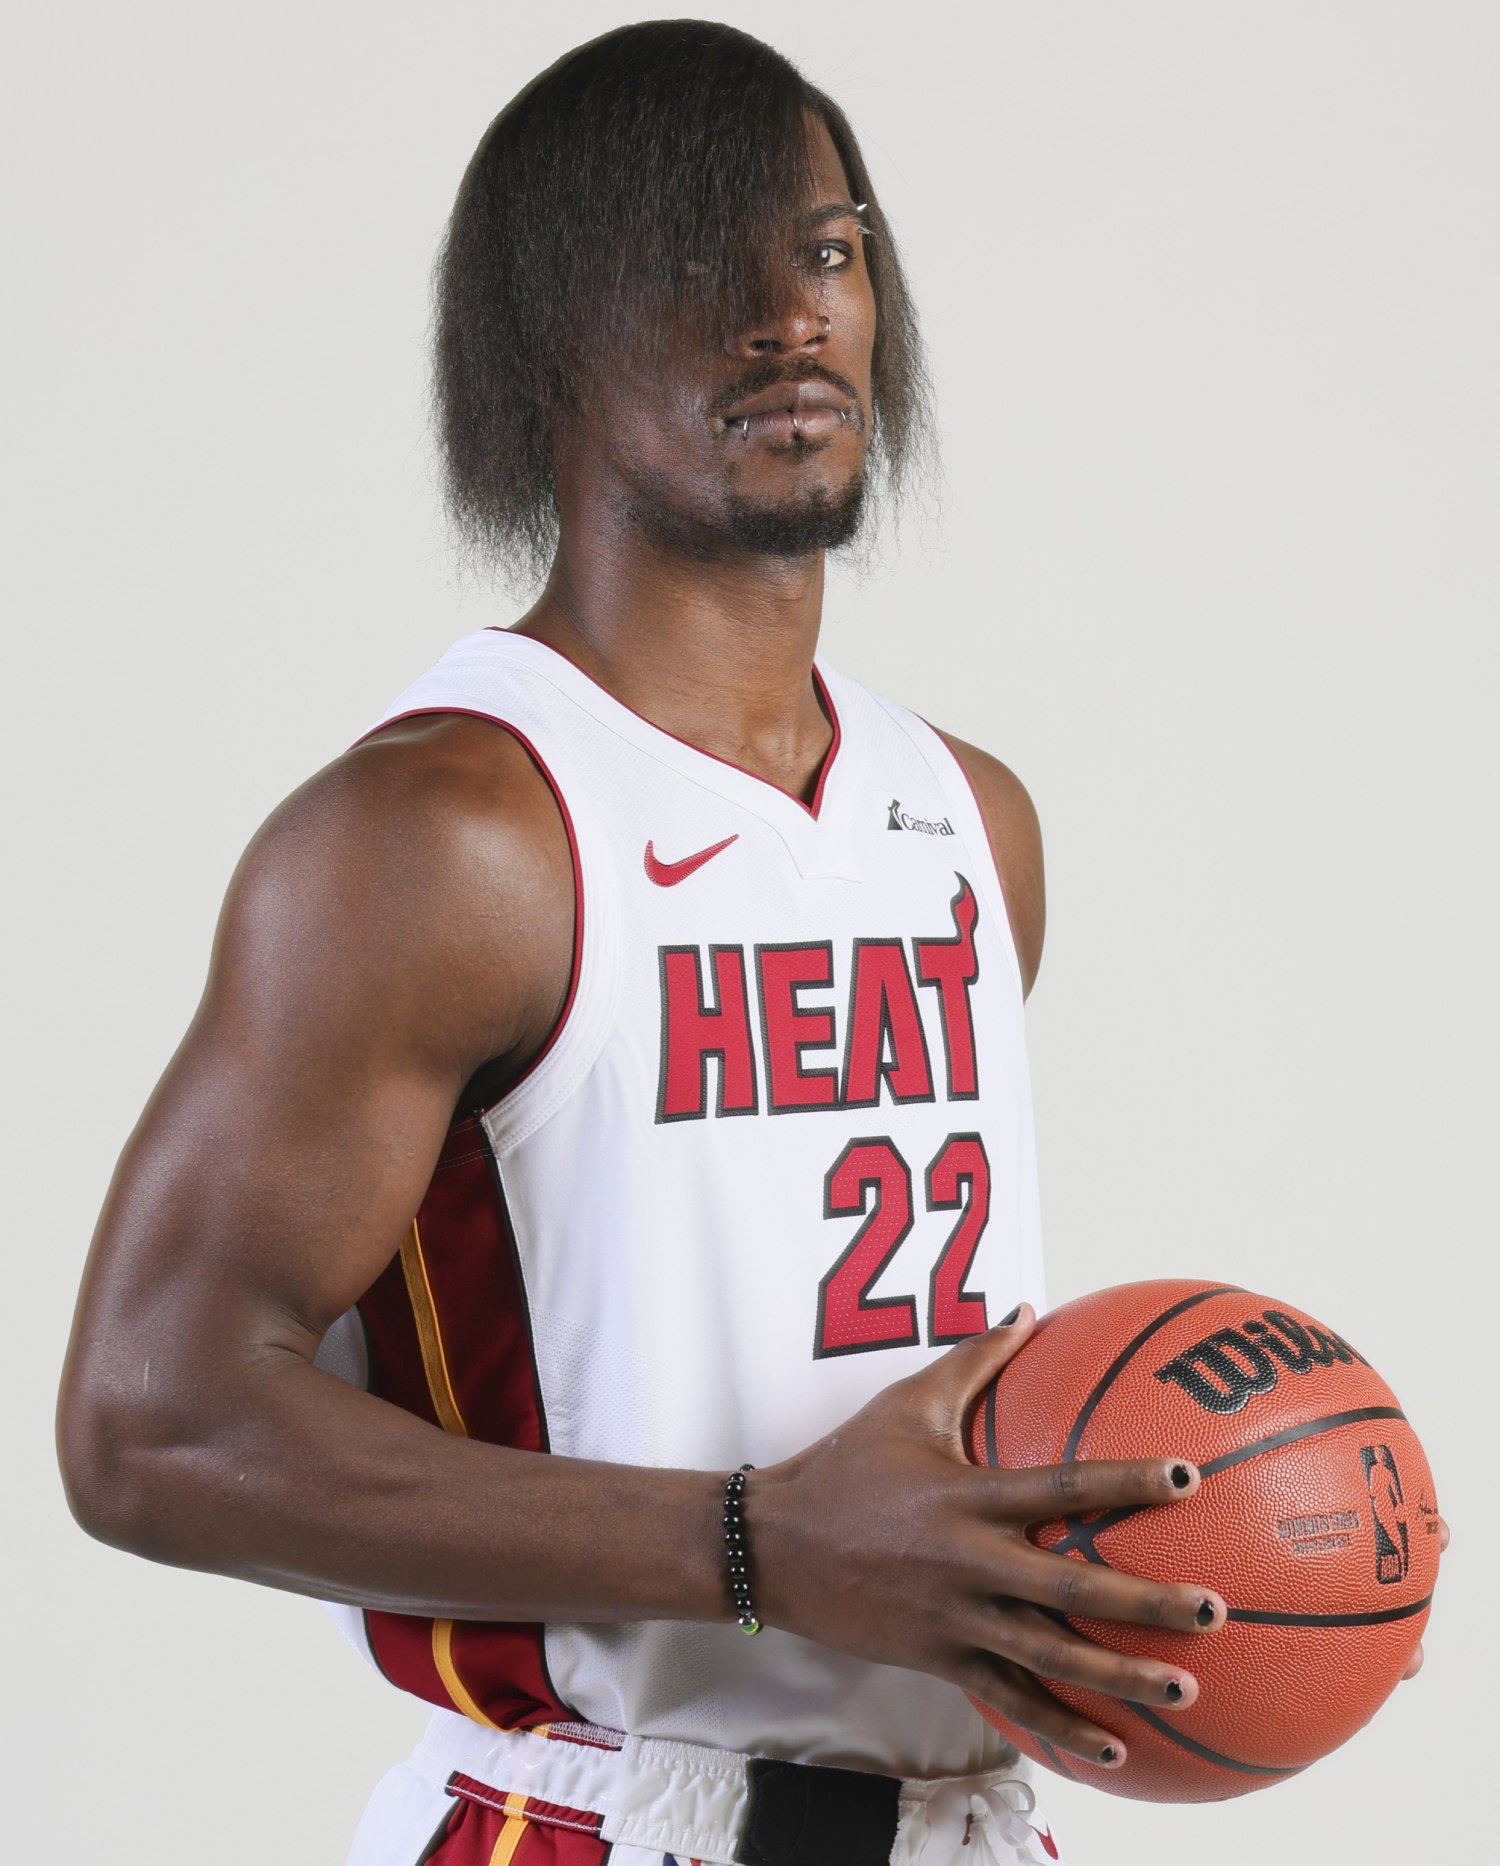 Gallery: Jimmy Butler's First HEAT Photo Shoot Photo Gallery